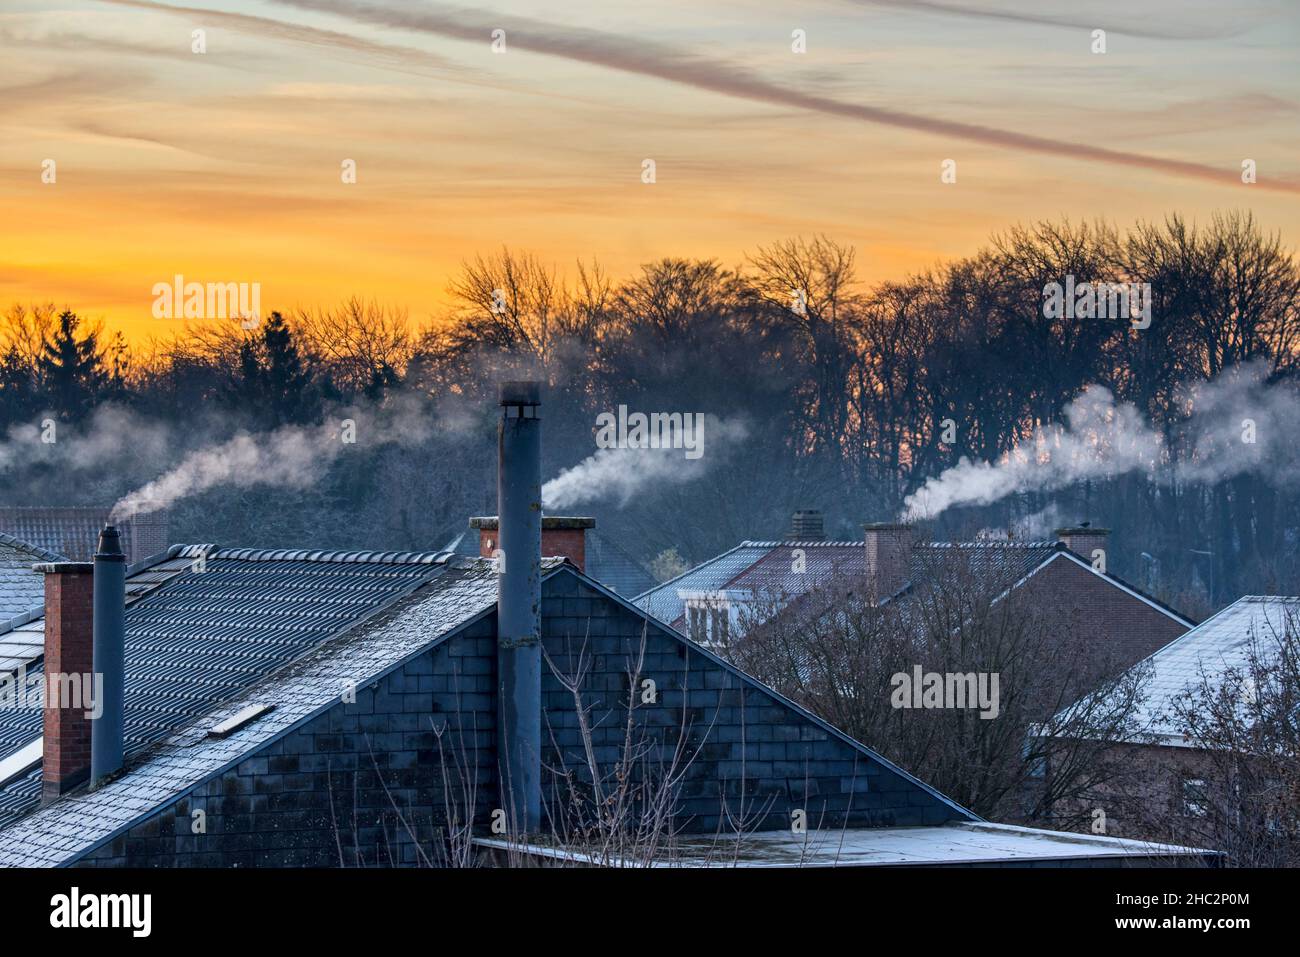 Smoking domestic rooftop chimneys from houses emitting vapour / vapor from gas boilers for central heating at sunrise on freezing cold winter morning Stock Photo